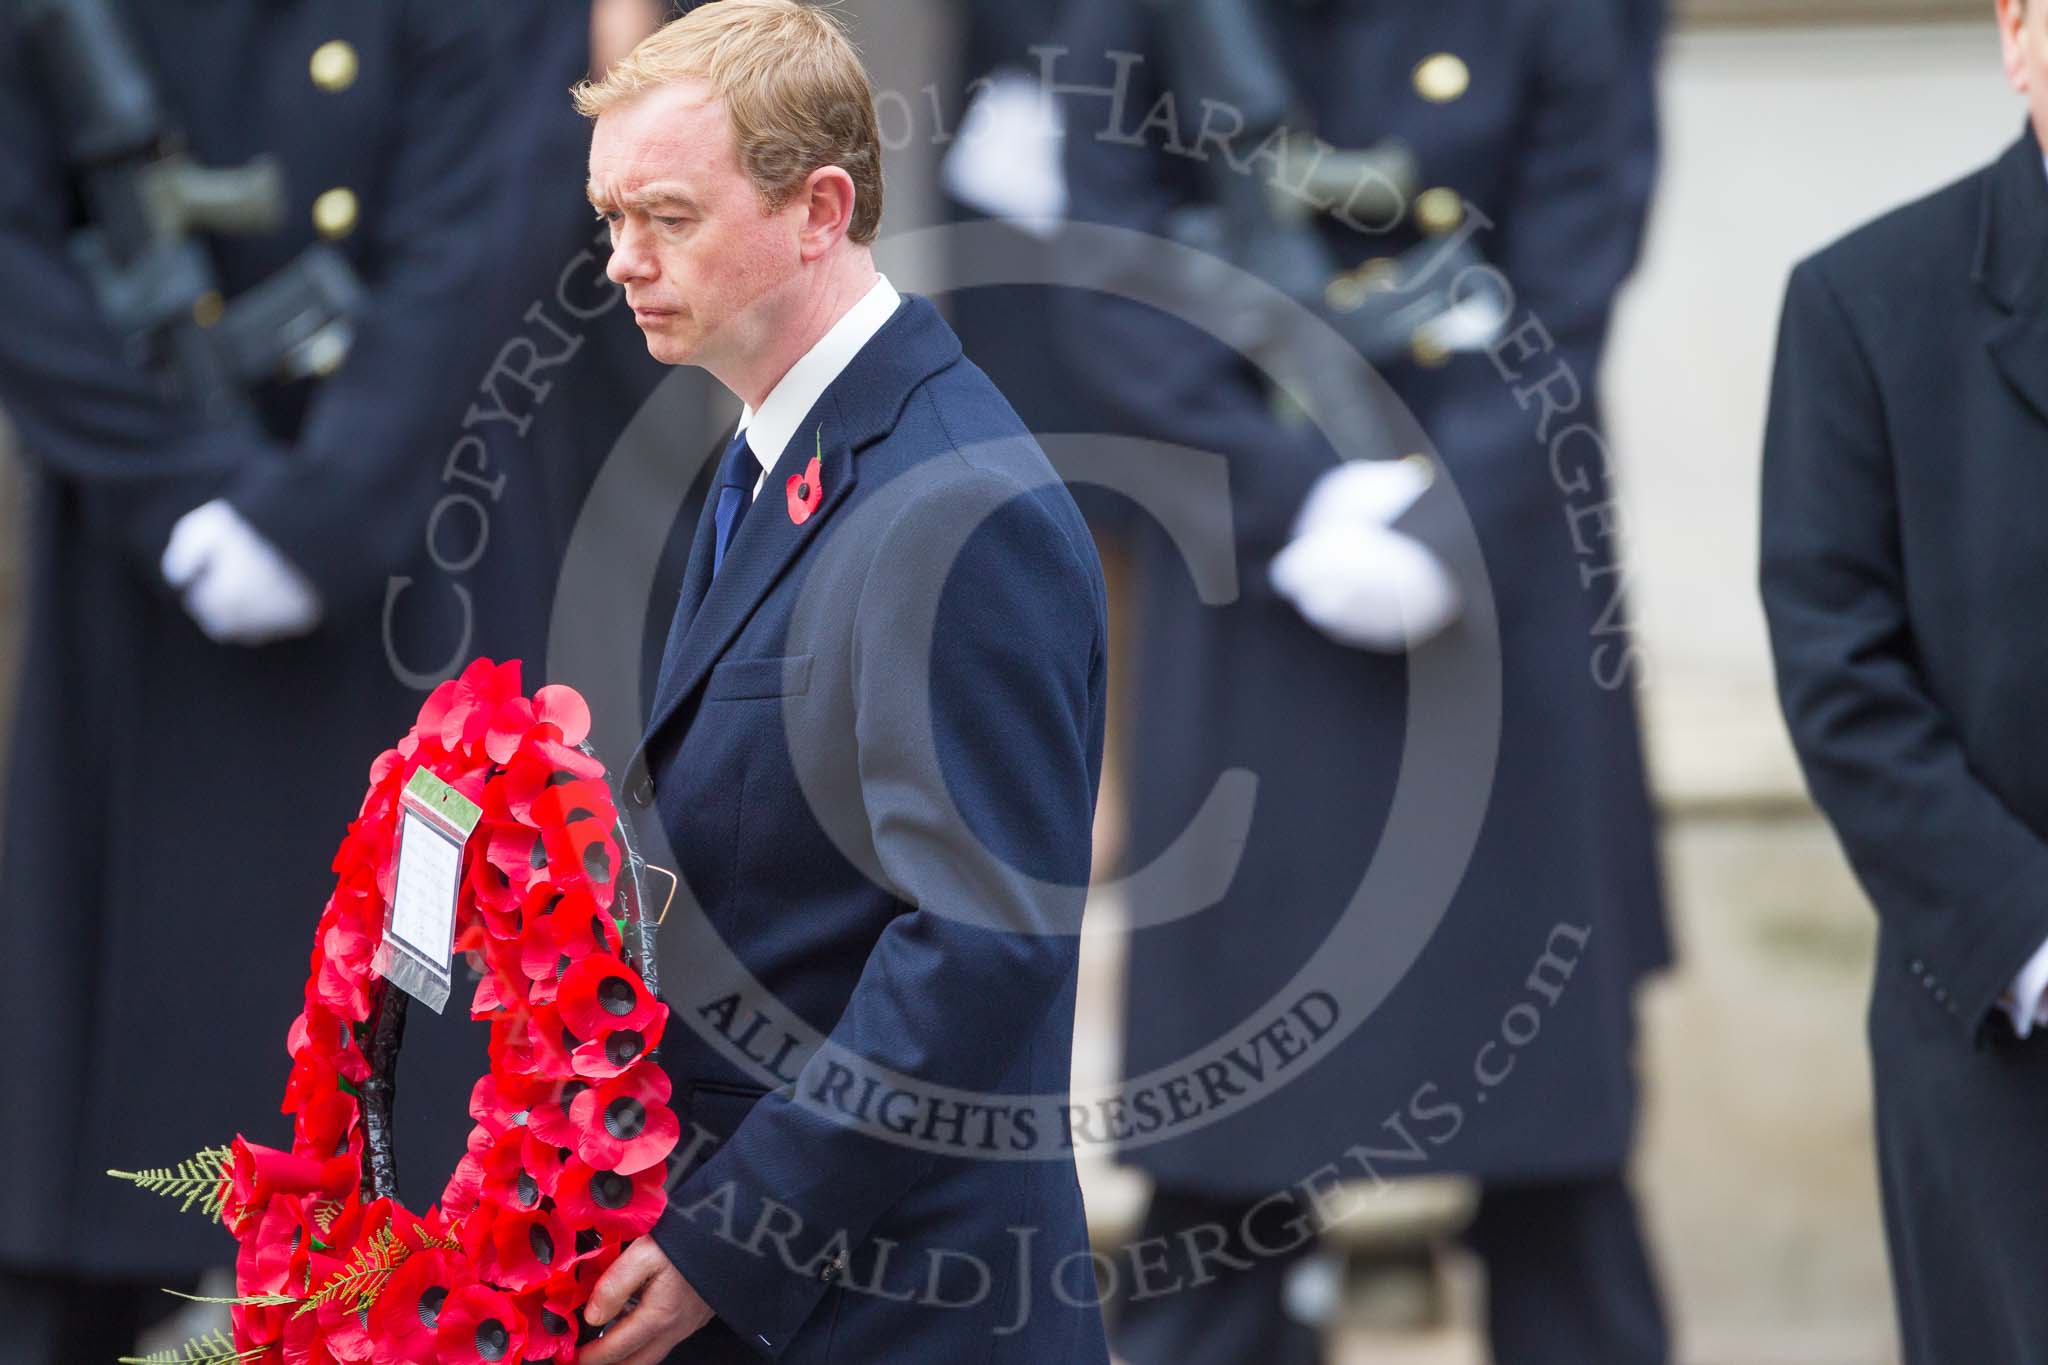 Remembrance Sunday at the Cenotaph 2015: The Leader of the Liberal Democrats, Tim Fallon, walking towards the Cenotaph with his wreath. Image #217, 08 November 2015 11:07 Whitehall, London, UK